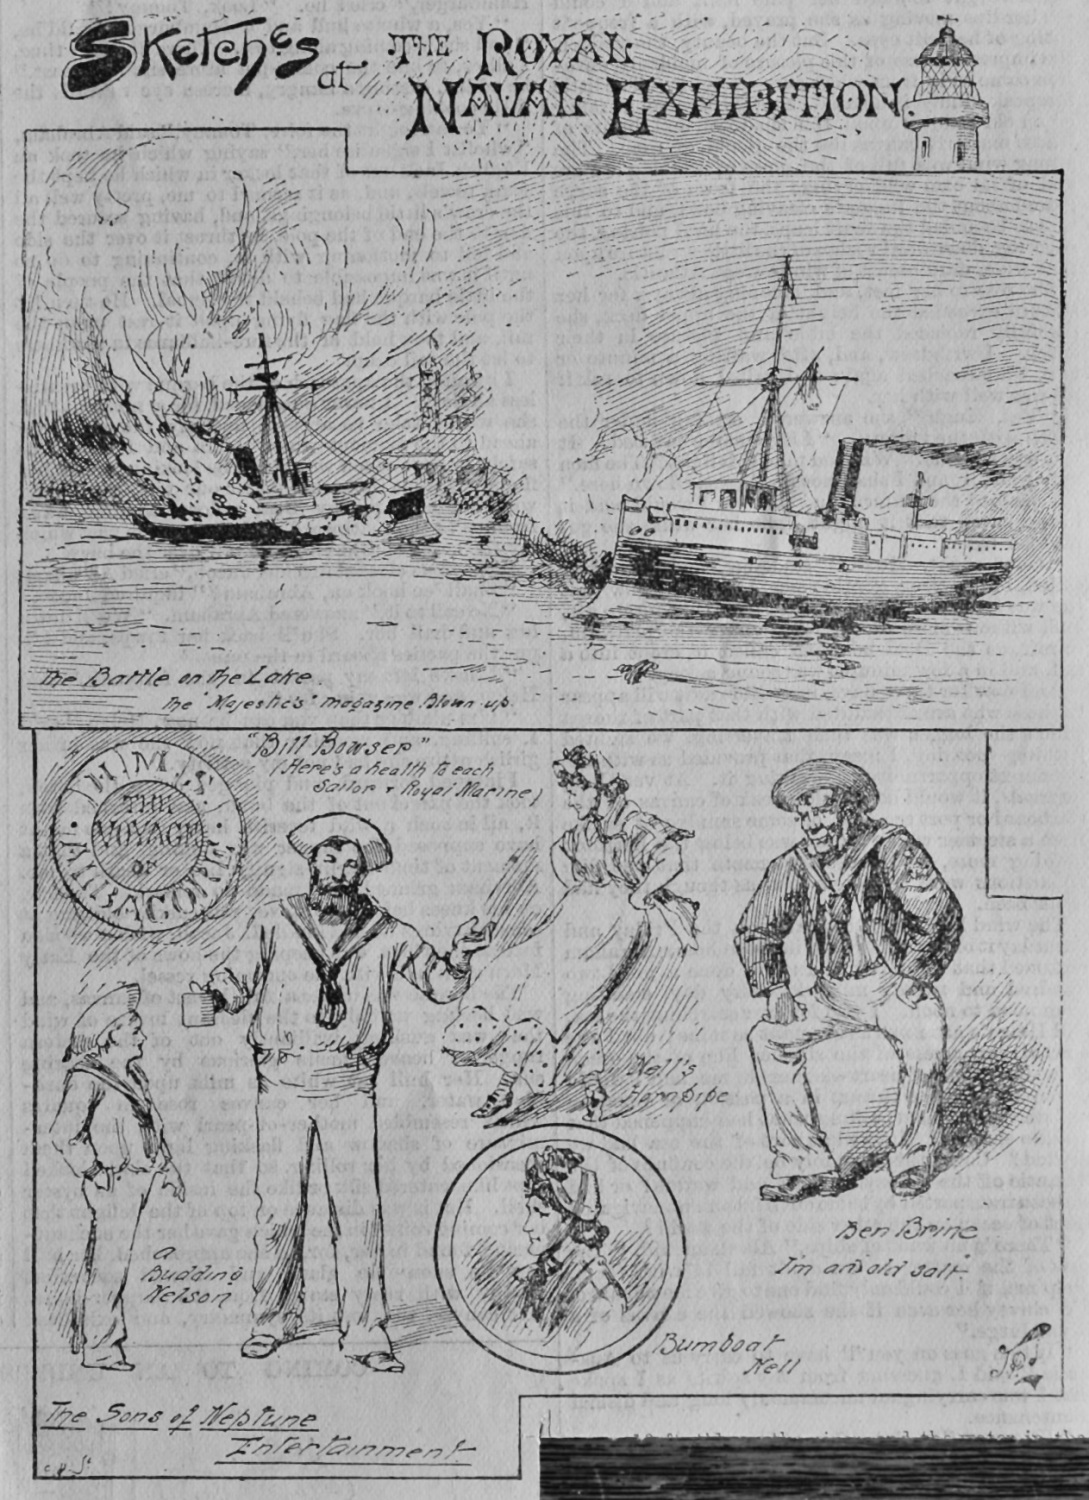 Sketches at the Royal Naval Exhibition.  1891.